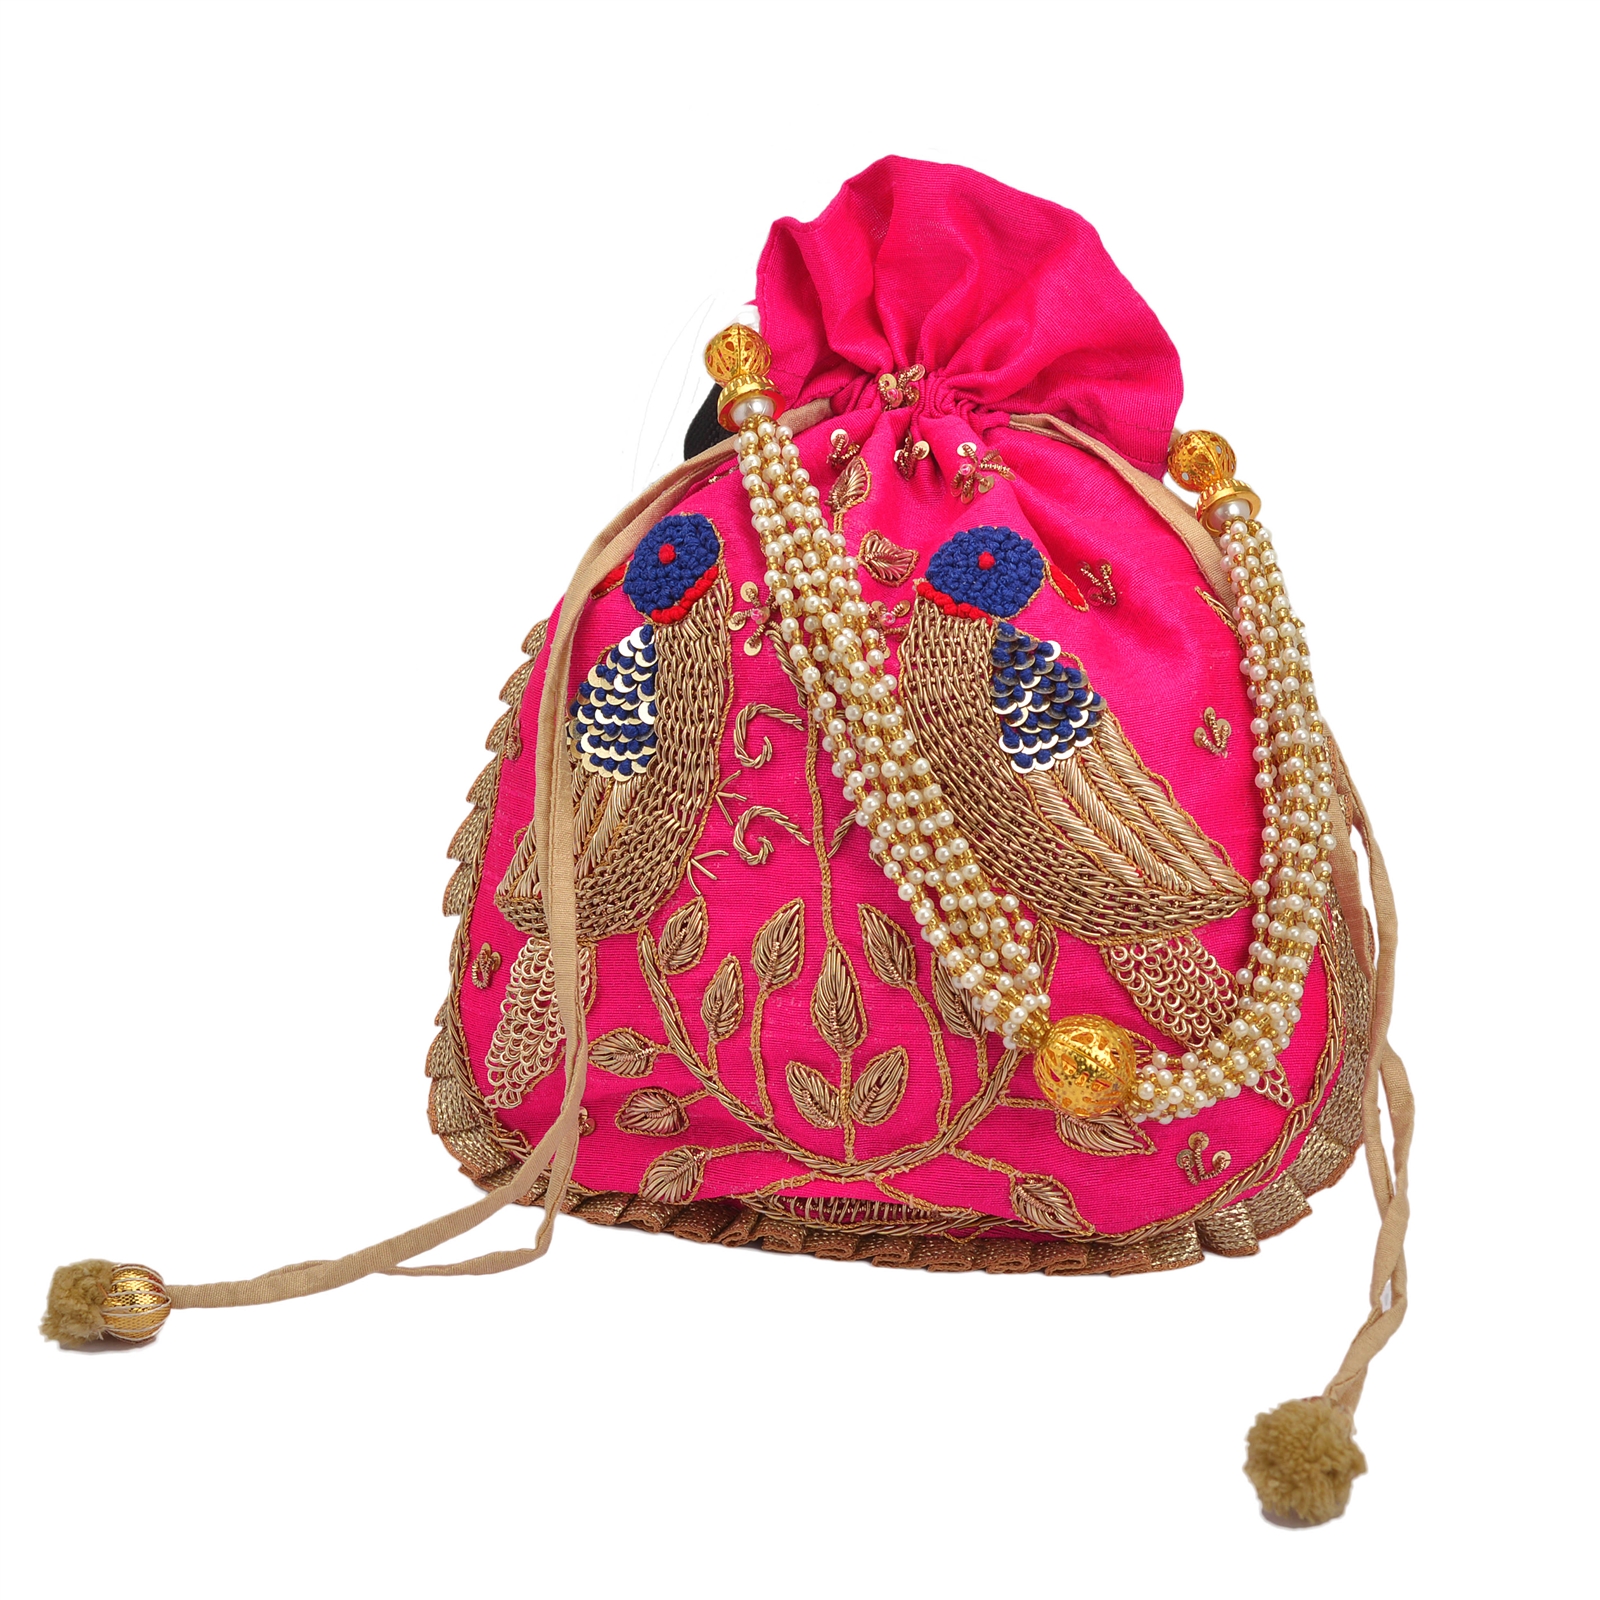 Wholesale Lot Of 100 Indian Handmade Women/'s Embroidered Potli Purse Bag Pouch Drawstring Bag Wedding Favor Return Gift For Guests Free Ship